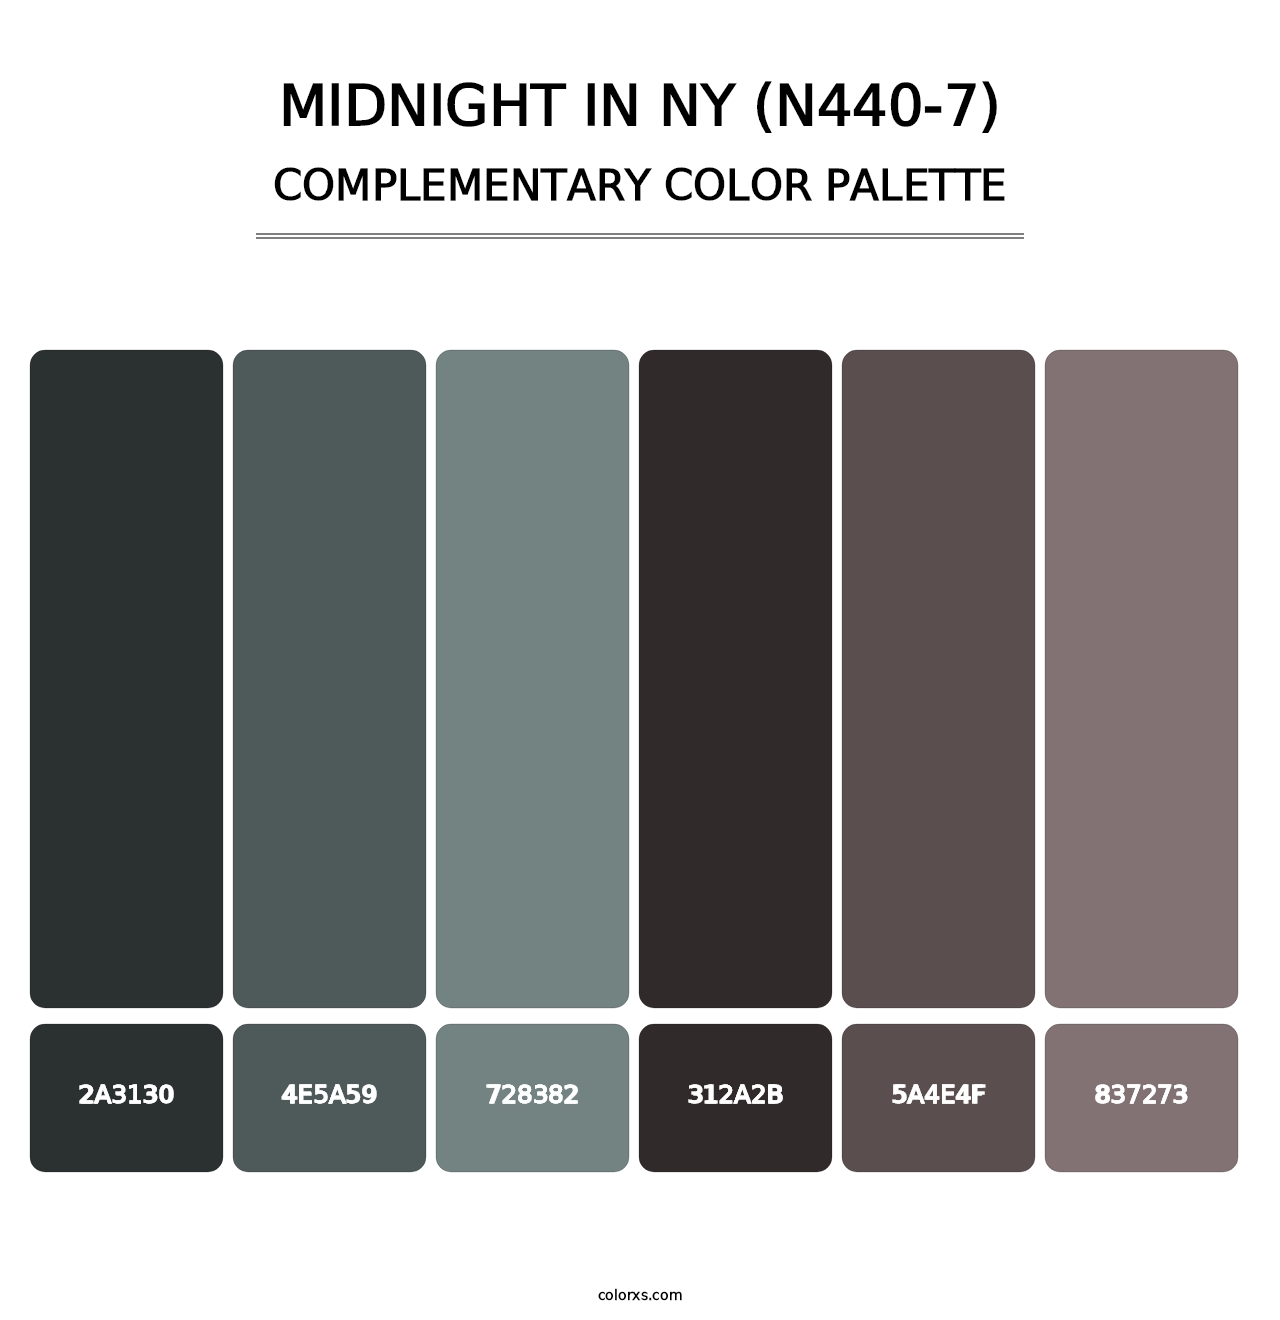 Midnight In Ny (N440-7) - Complementary Color Palette